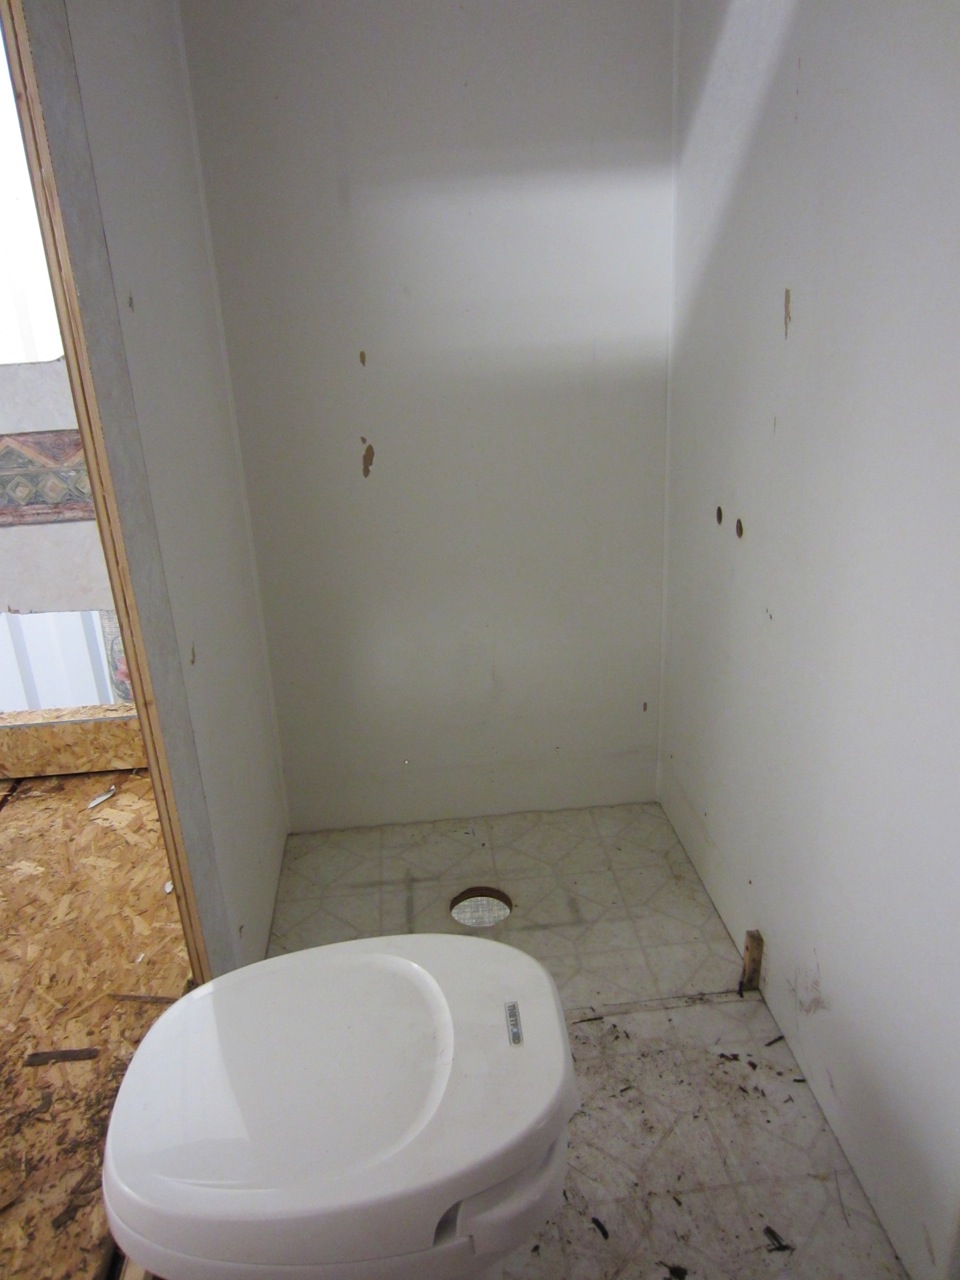  Shower is out too! We're going to put in a corner shower to increase space in the bedroom and in the shower. 